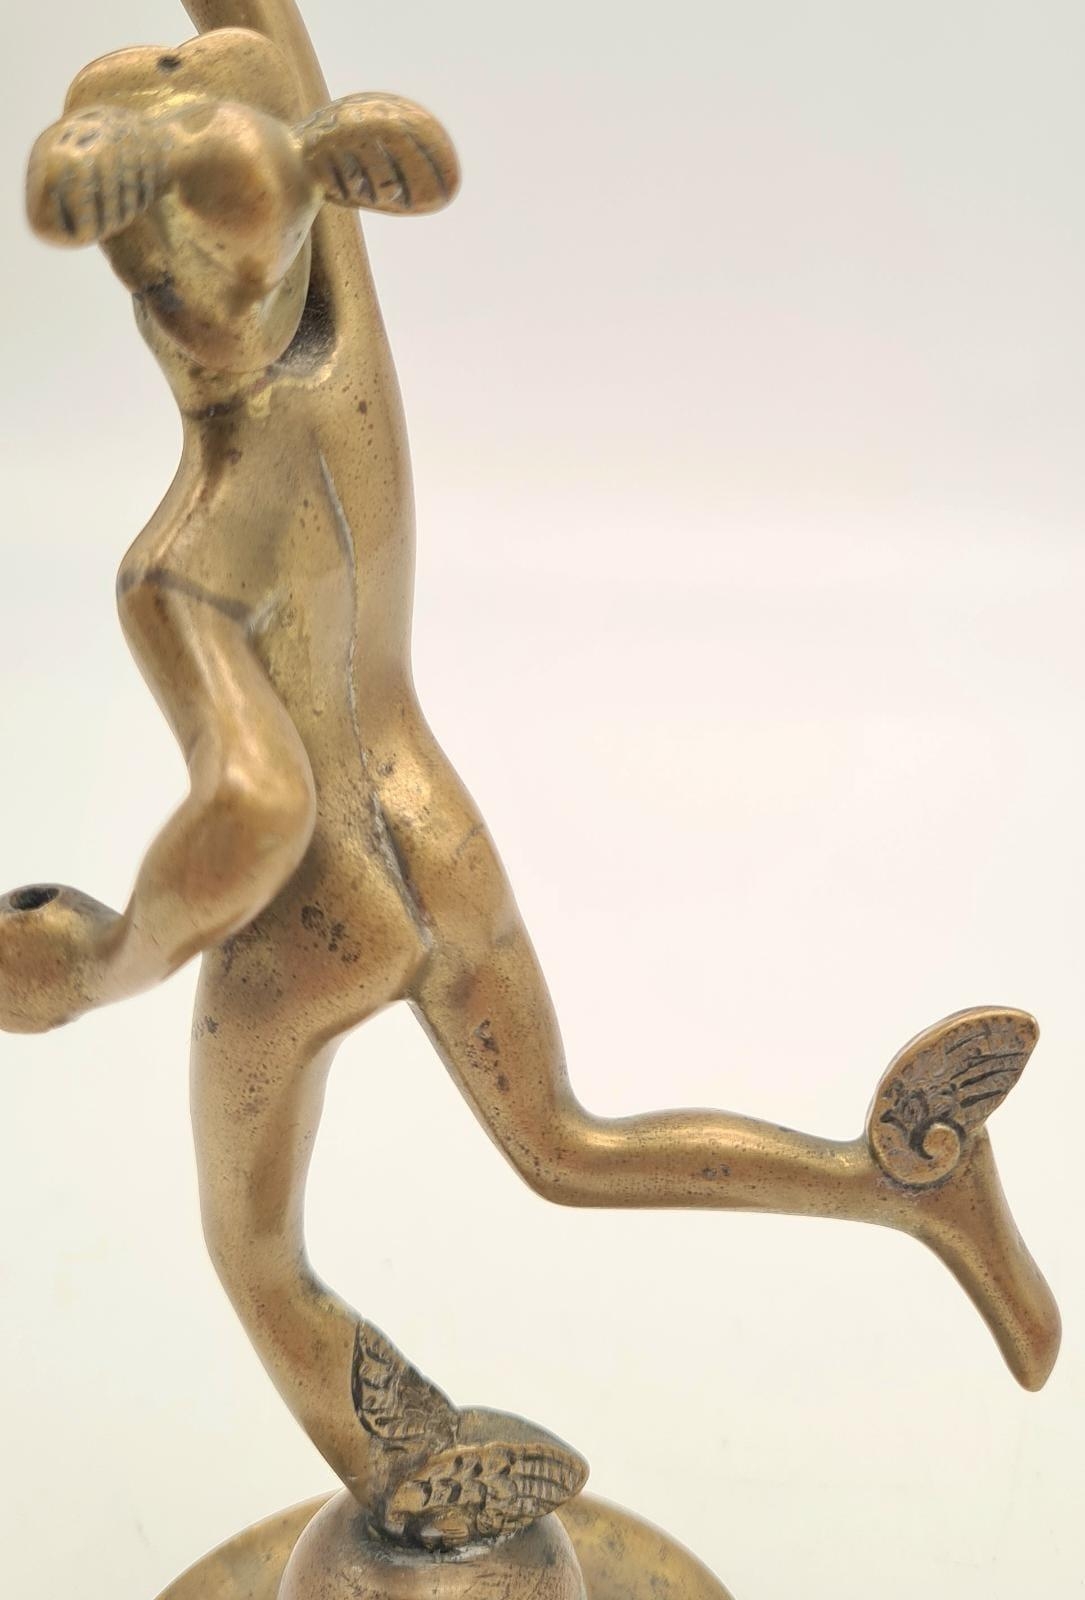 An Antique Rare Bronze Car Mascot Figure in the Form of Mercury - God of Speed and escort to the - Image 5 of 5